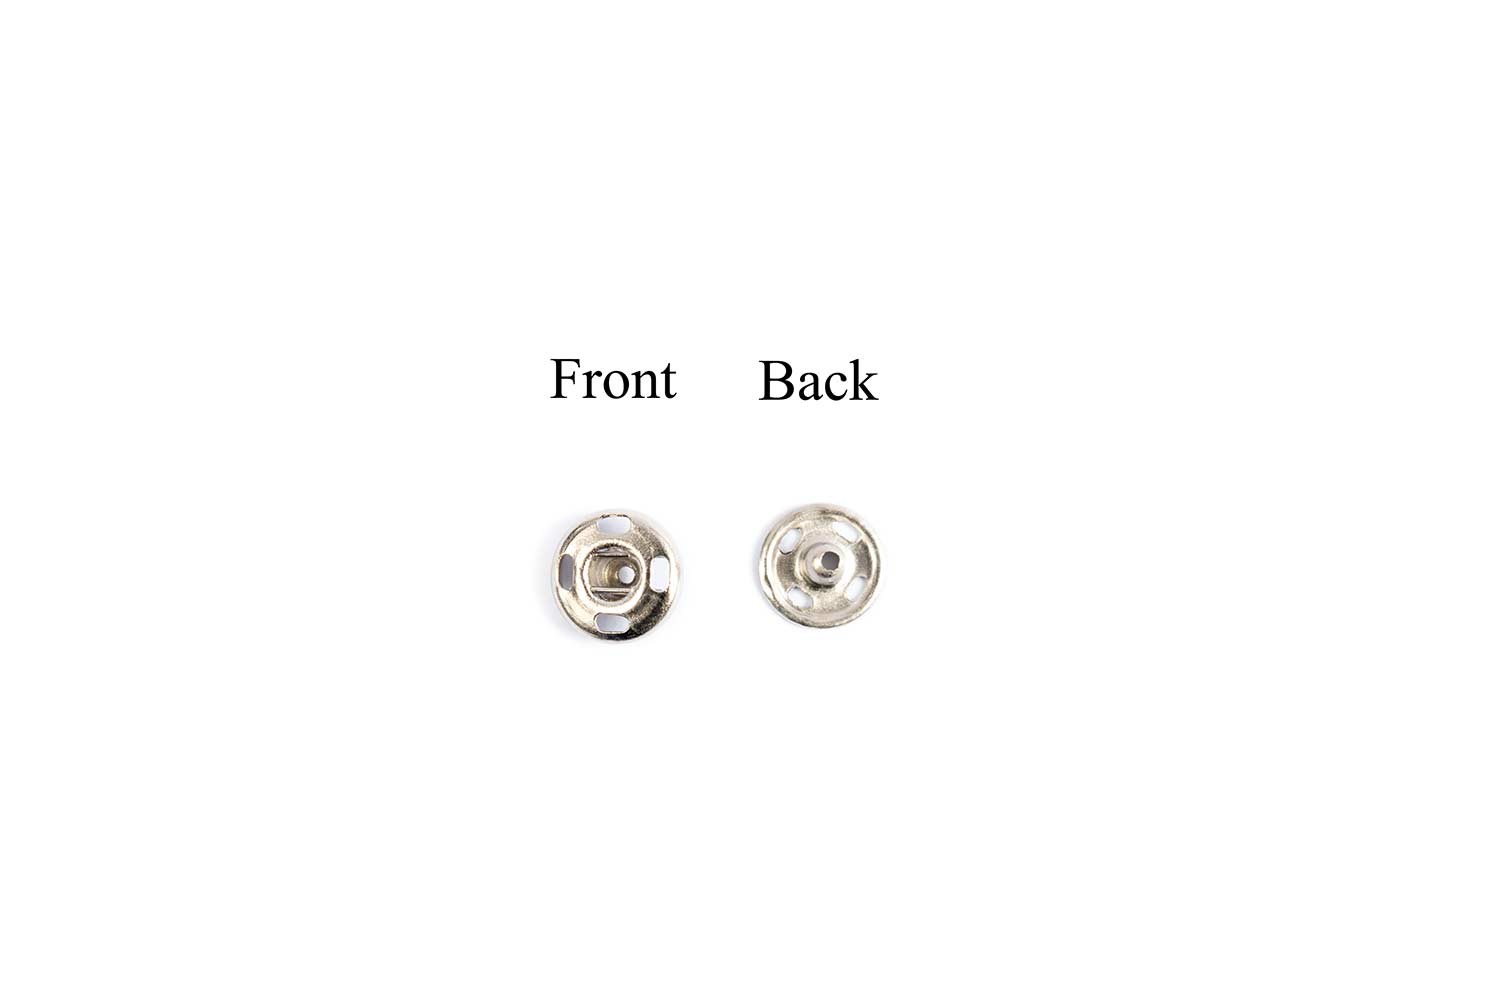 TICH001 Pony Tich Buttons/ Snap Fasteners/ Press Buttons - Designers Need